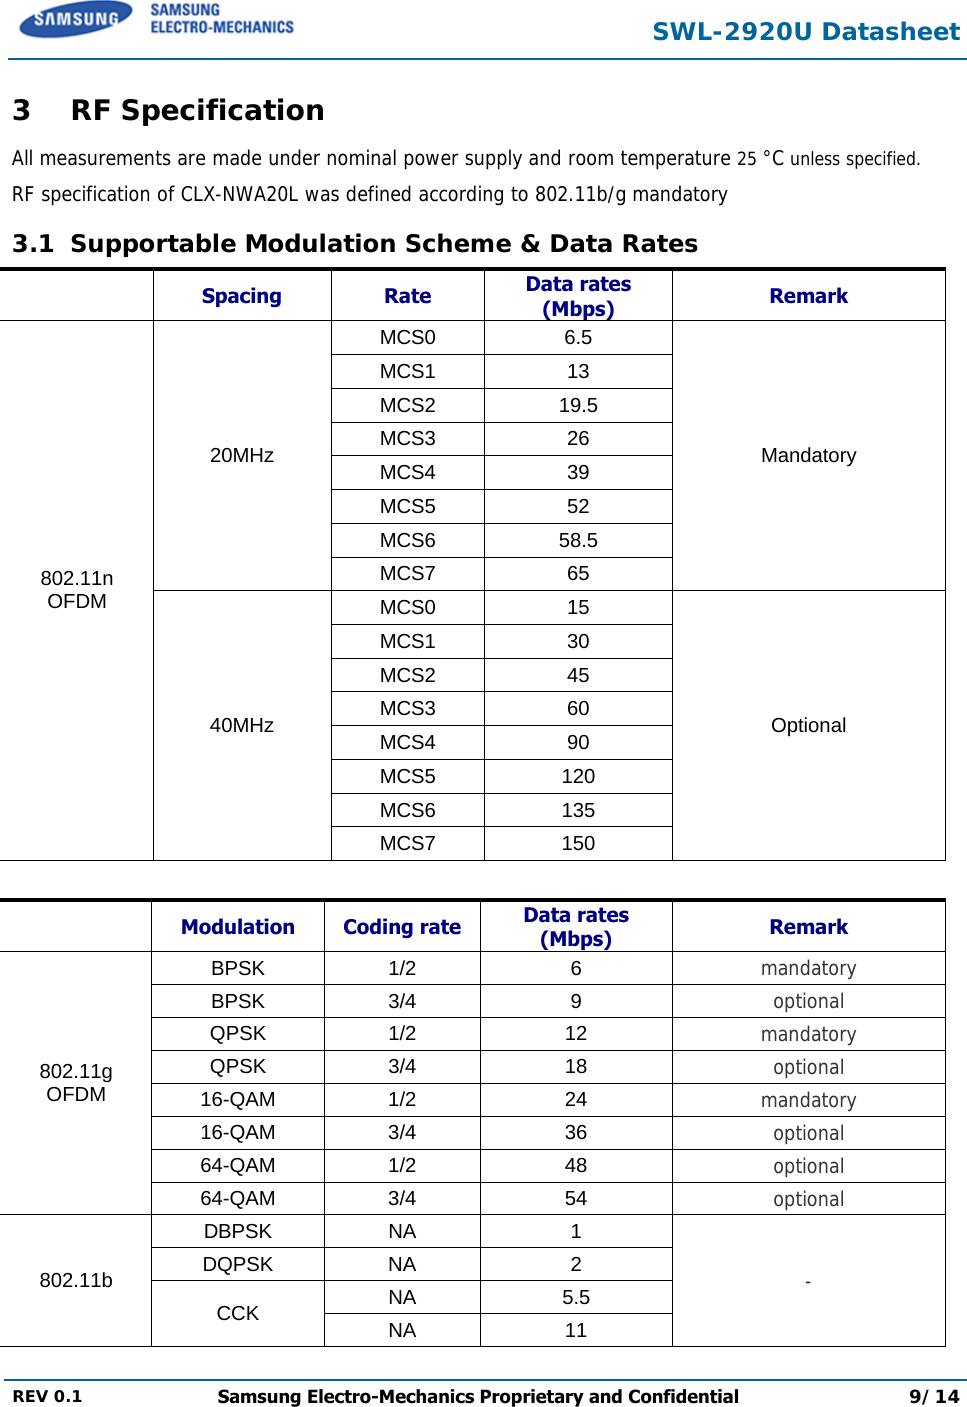  SWL-2920U Datasheet  REV 0.1  Samsung Electro-Mechanics Proprietary and Confidential 9/14  3 RF Specification All measurements are made under nominal power supply and room temperature 25 °C unless specified. RF specification of CLX-NWA20L was defined according to 802.11b/g mandatory  3.1  Supportable Modulation Scheme &amp; Data Rates  Spacing Rate Data rates (Mbps)  Remark MCS0 6.5 MCS1 13 MCS2 19.5 MCS3 26 MCS4 39 MCS5 52 MCS6 58.5 20MHz MCS7 65 Mandatory MCS0 15 MCS1 30 MCS2 45 MCS3 60 MCS4 90 MCS5 120 MCS6 135 802.11n OFDM 40MHz MCS7 150 Optional   Modulation Coding rate Data rates (Mbps)  Remark BPSK 1/2  6  mandatory BPSK 3/4  9  optional QPSK 1/2  12  mandatory QPSK 3/4  18  optional 16-QAM 1/2  24  mandatory 16-QAM 3/4  36  optional 64-QAM 1/2  48  optional 802.11g OFDM 64-QAM 3/4  54  optional DBPSK NA  1 DQPSK NA  2 NA 5.5 802.11b CCK  NA 11 - 